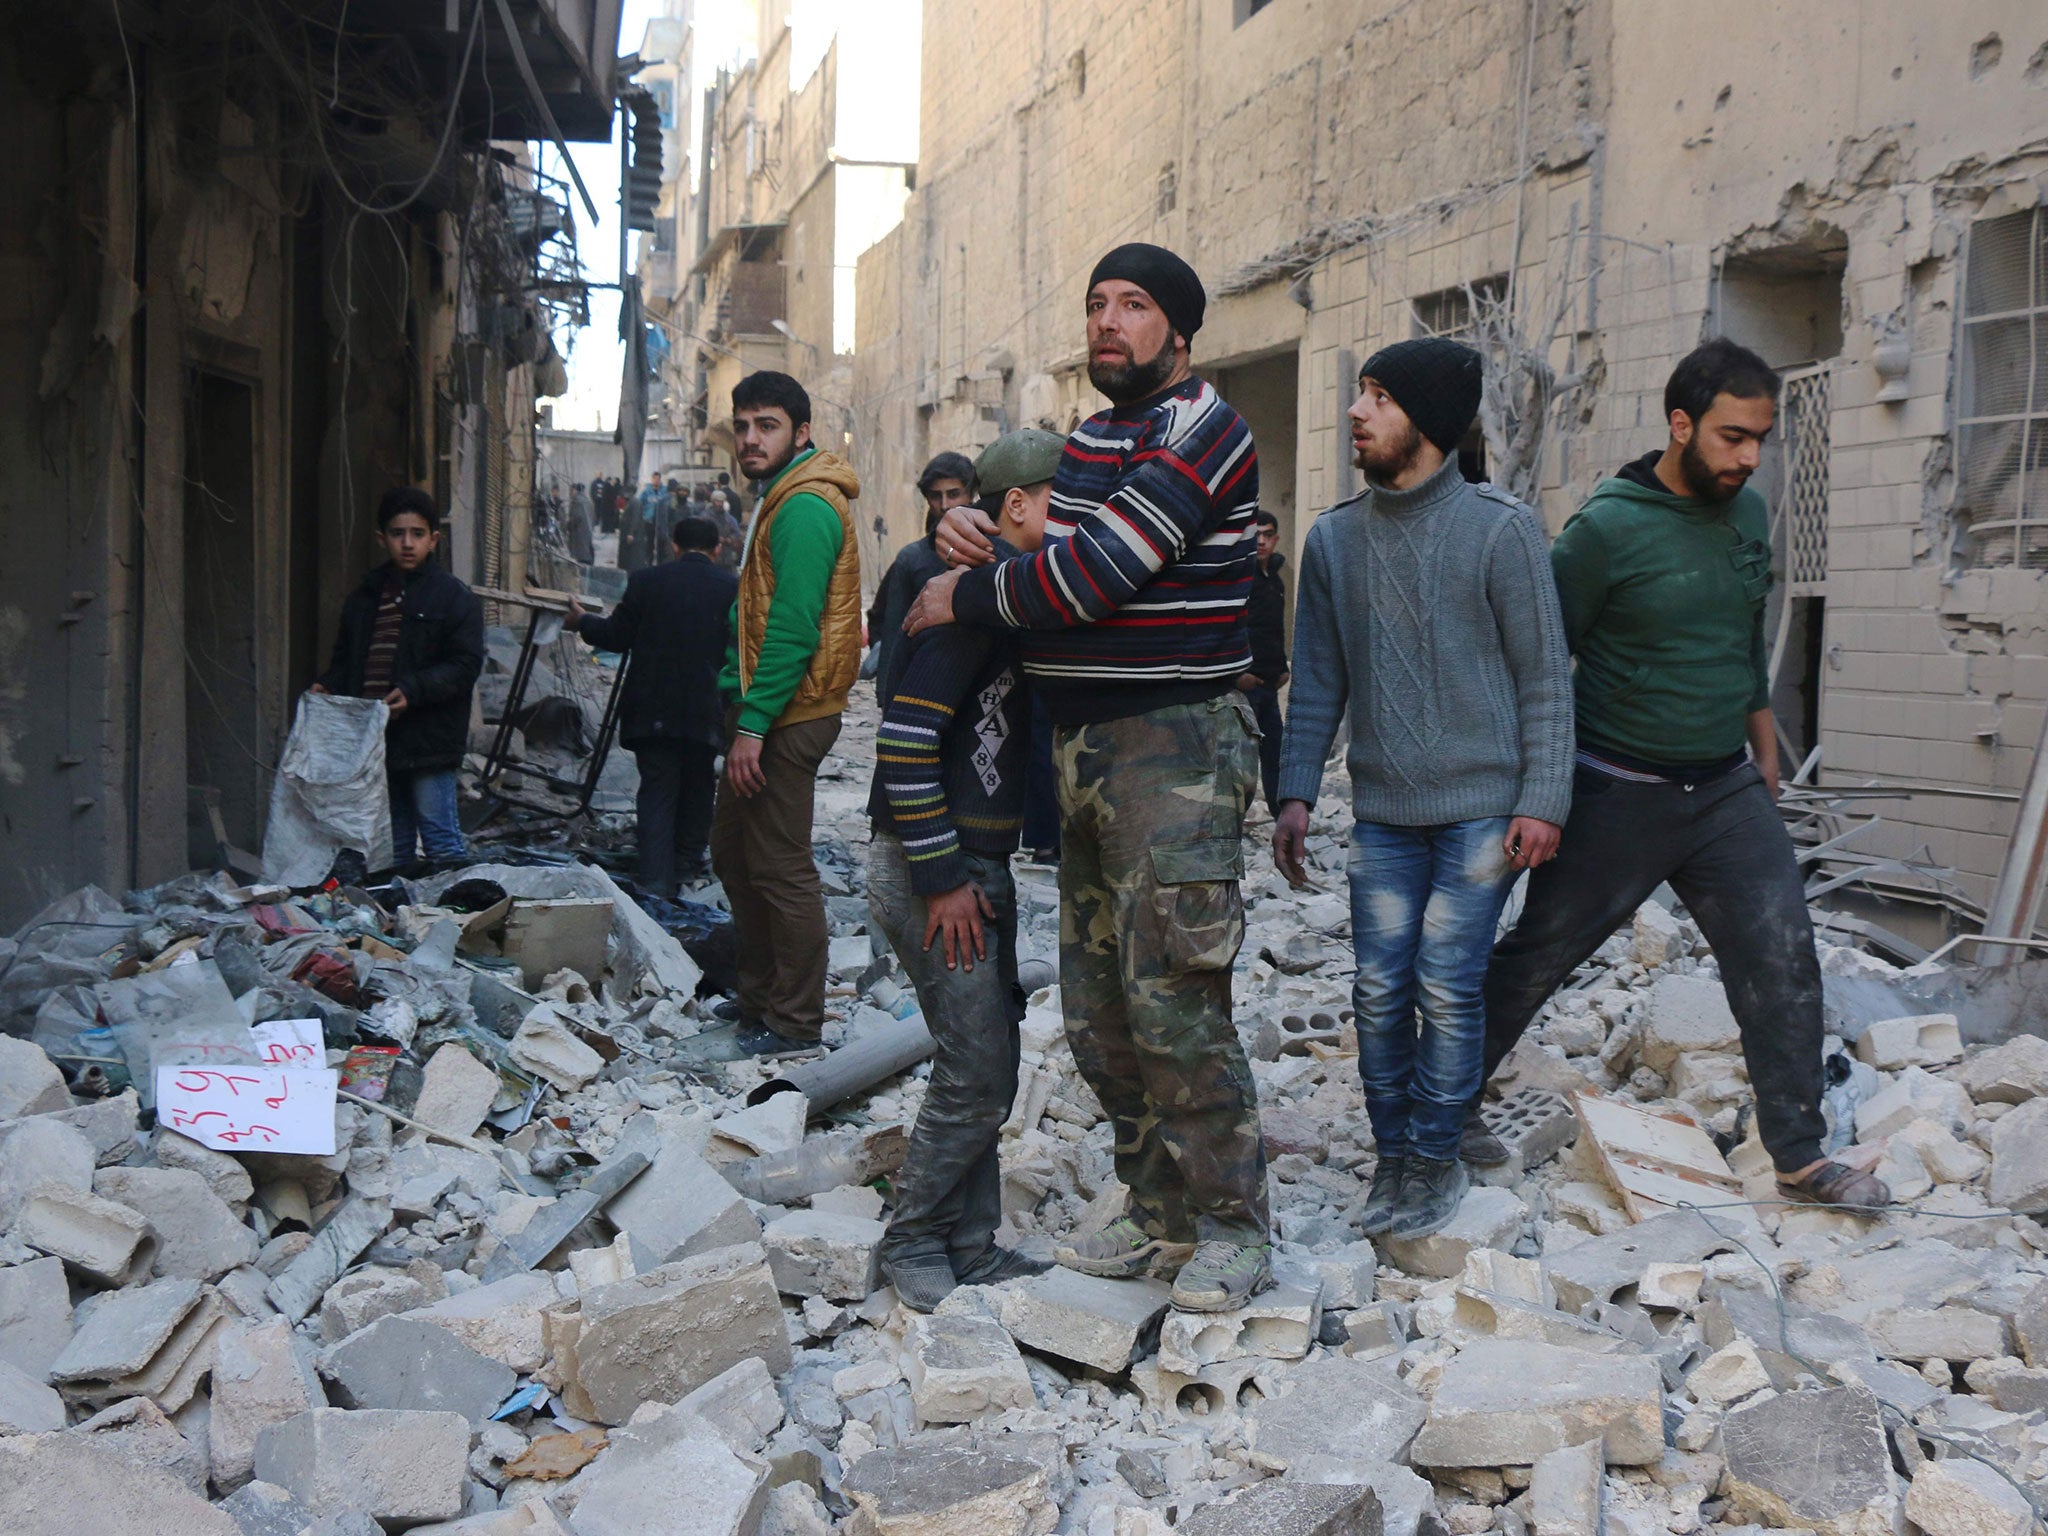 Syrian civilians among the rubble in rebel-held Aleppo after Russian-backed air strikes